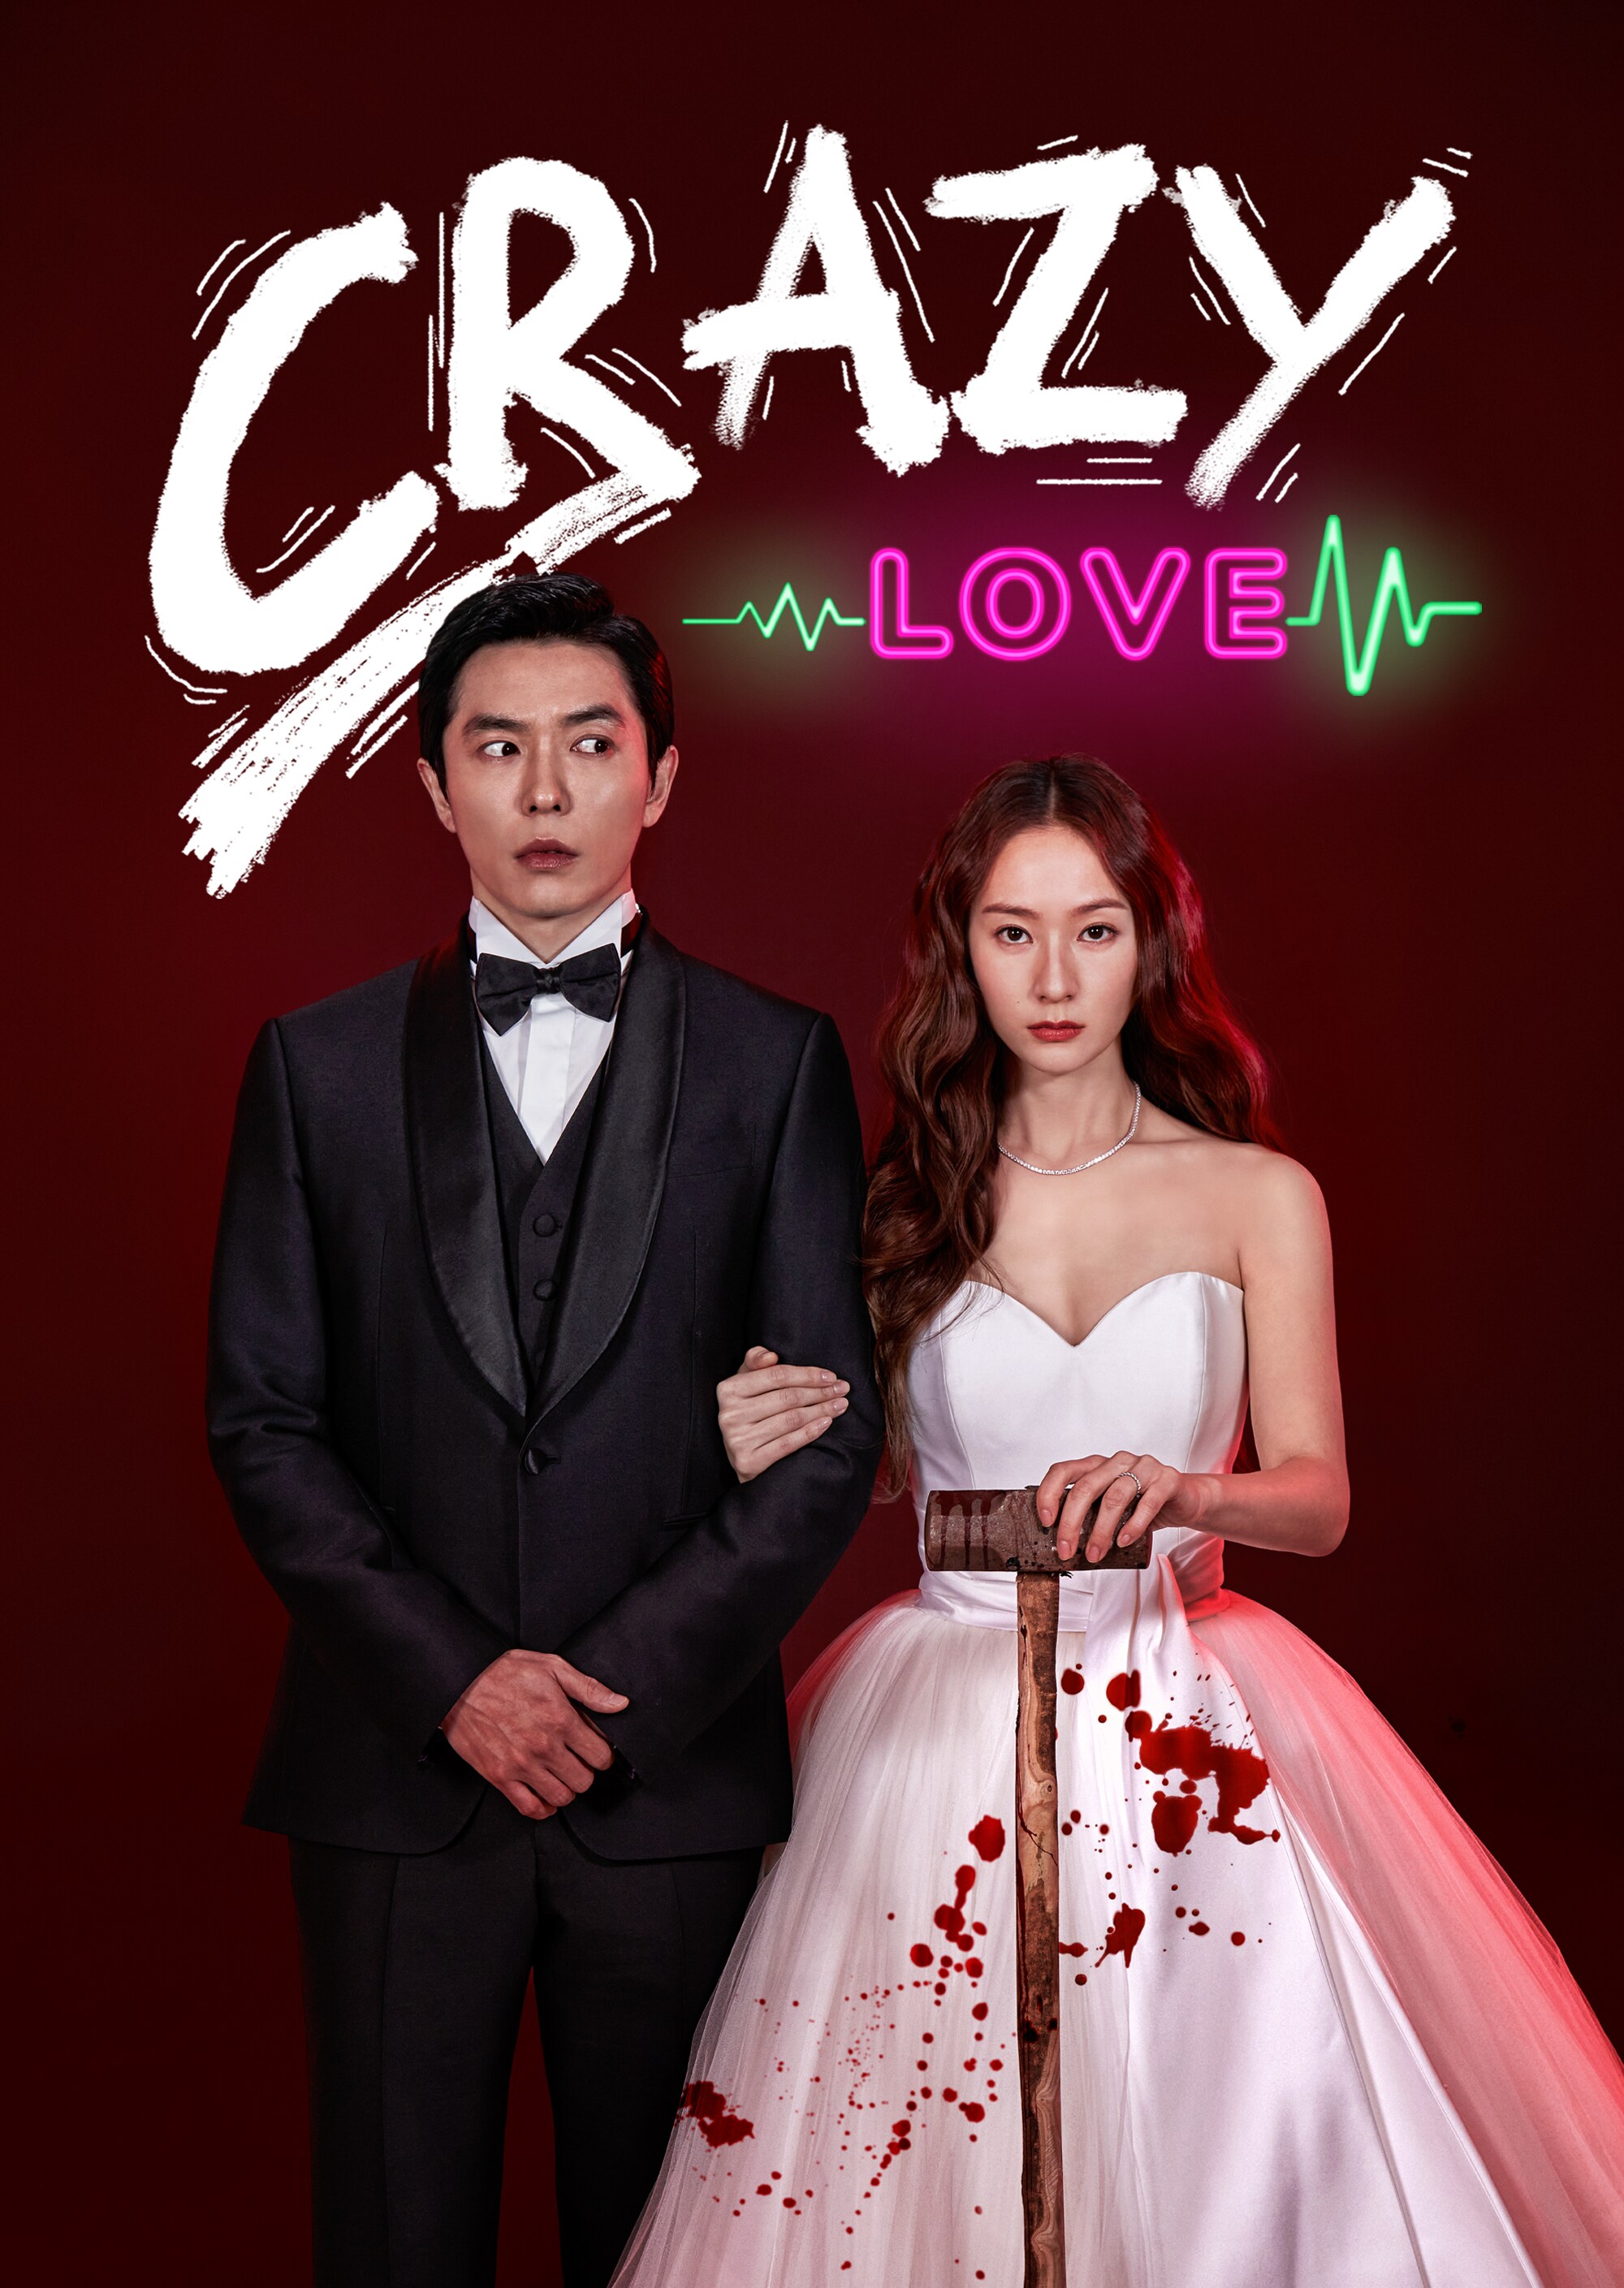 Crazy Love | now streaming